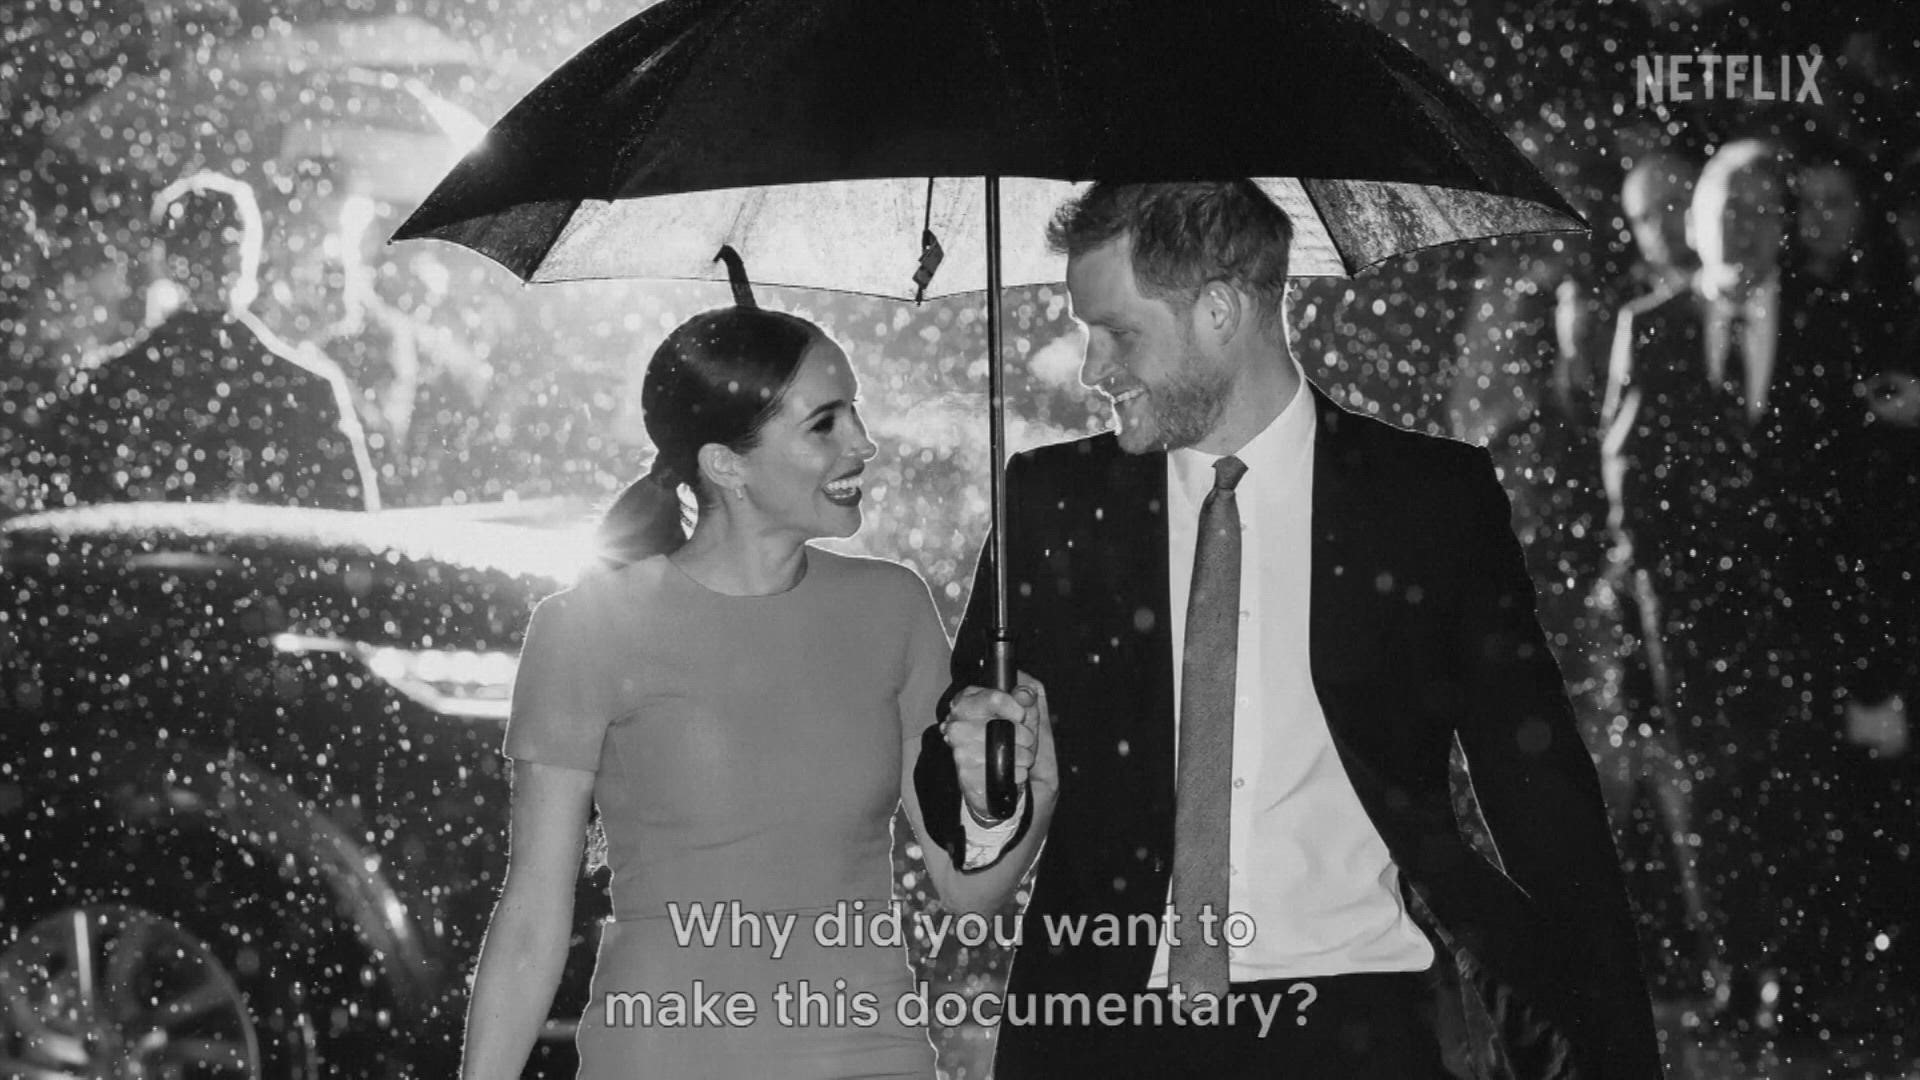 As the Prince and Princess of Wales begin engagements on their trip to Boston, Netflix has released a trailer for the upcoming documentary series "Harry & Meghan."